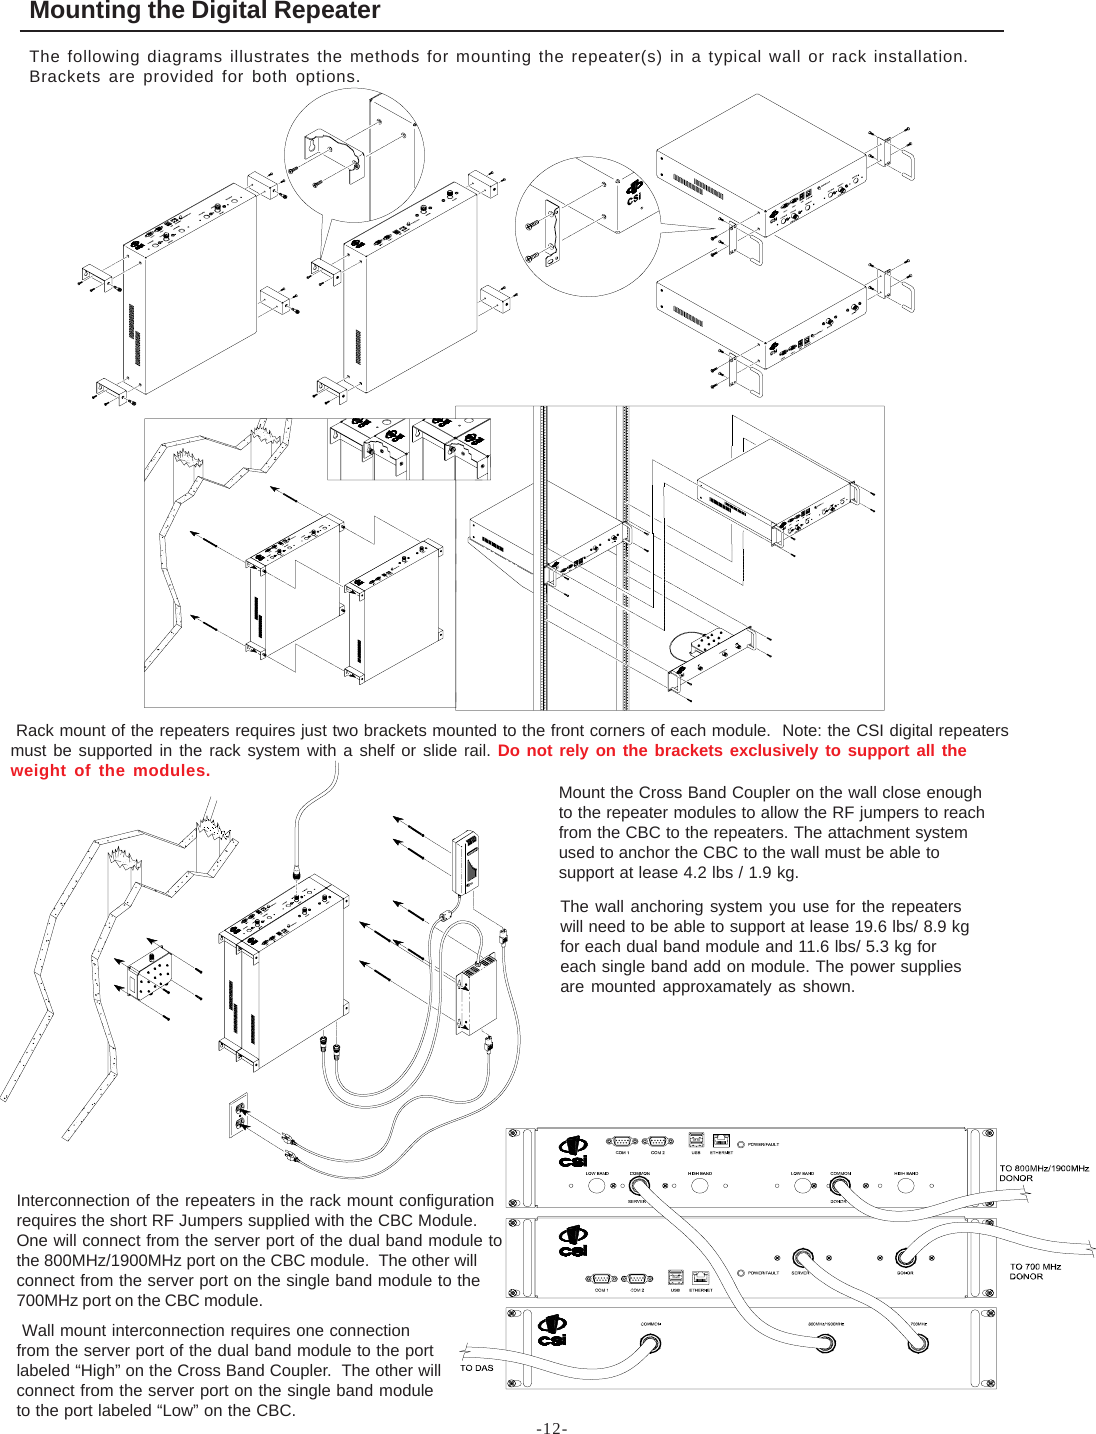 -12-Mounting the Digital RepeaterThe following diagrams illustrates the methods for mounting the repeater(s) in a typical wall or rack installation.Brackets are provided for both options. Rack mount of the repeaters requires just two brackets mounted to the front corners of each module.  Note: the CSI digital repeatersmust be supported in the rack system with a shelf or slide rail. Do not rely on the brackets exclusively to support all theweight of the modules.Mount the Cross Band Coupler on the wall close enoughto the repeater modules to allow the RF jumpers to reachfrom the CBC to the repeaters. The attachment systemused to anchor the CBC to the wall must be able tosupport at lease 4.2 lbs / 1.9 kg.The wall anchoring system you use for the repeaterswill need to be able to support at lease 19.6 lbs/ 8.9 kgfor each dual band module and 11.6 lbs/ 5.3 kg foreach single band add on module. The power suppliesare mounted approxamately as shown.Interconnection of the repeaters in the rack mount configurationrequires the short RF Jumpers supplied with the CBC Module.One will connect from the server port of the dual band module tothe 800MHz/1900MHz port on the CBC module.  The other willconnect from the server port on the single band module to the700MHz port on the CBC module. Wall mount interconnection requires one connectionfrom the server port of the dual band module to the portlabeled “High” on the Cross Band Coupler.  The other willconnect from the server port on the single band moduleto the port labeled “Low” on the CBC.